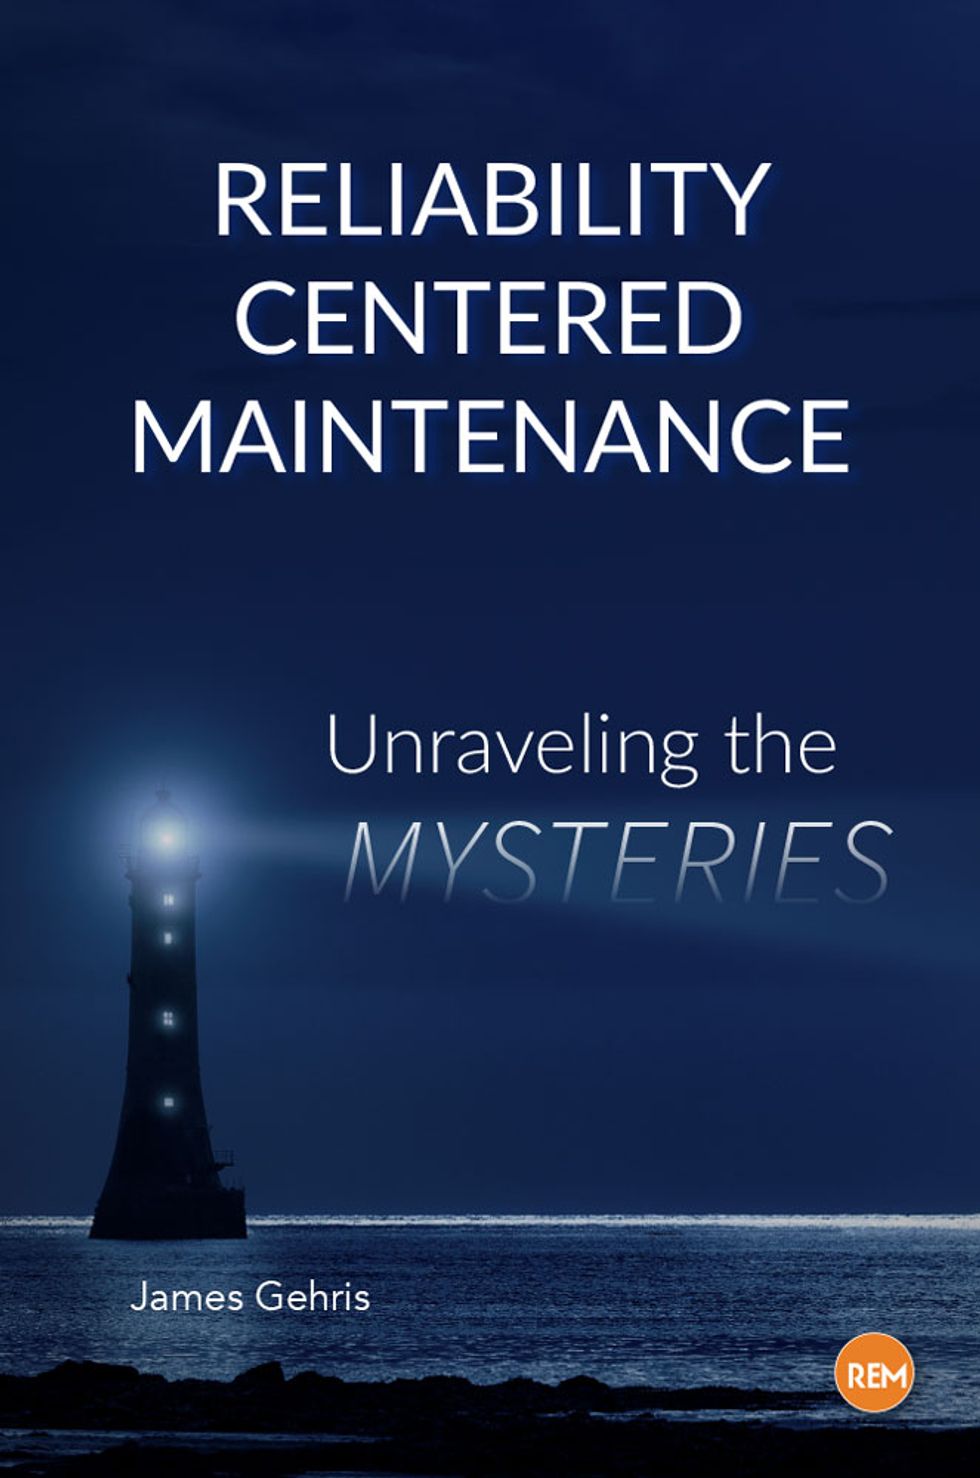  Reliability Centered Maintenance: Unraveling the Mysteries 